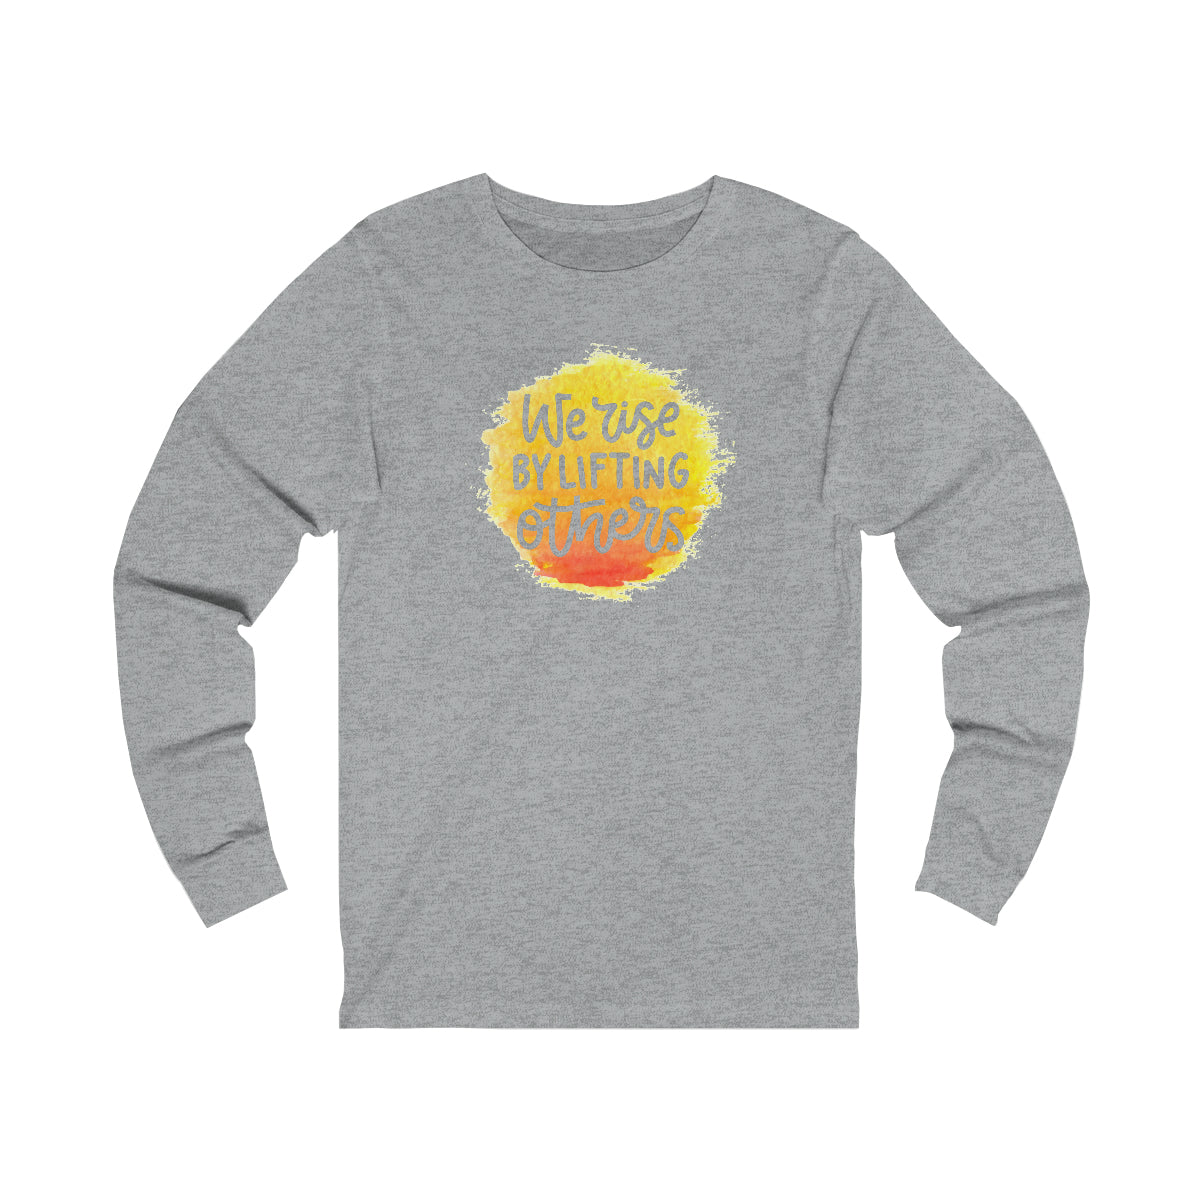 "We Rise By Lifting Others" Unisex Jersey Long Sleeve Tee - 11 colors